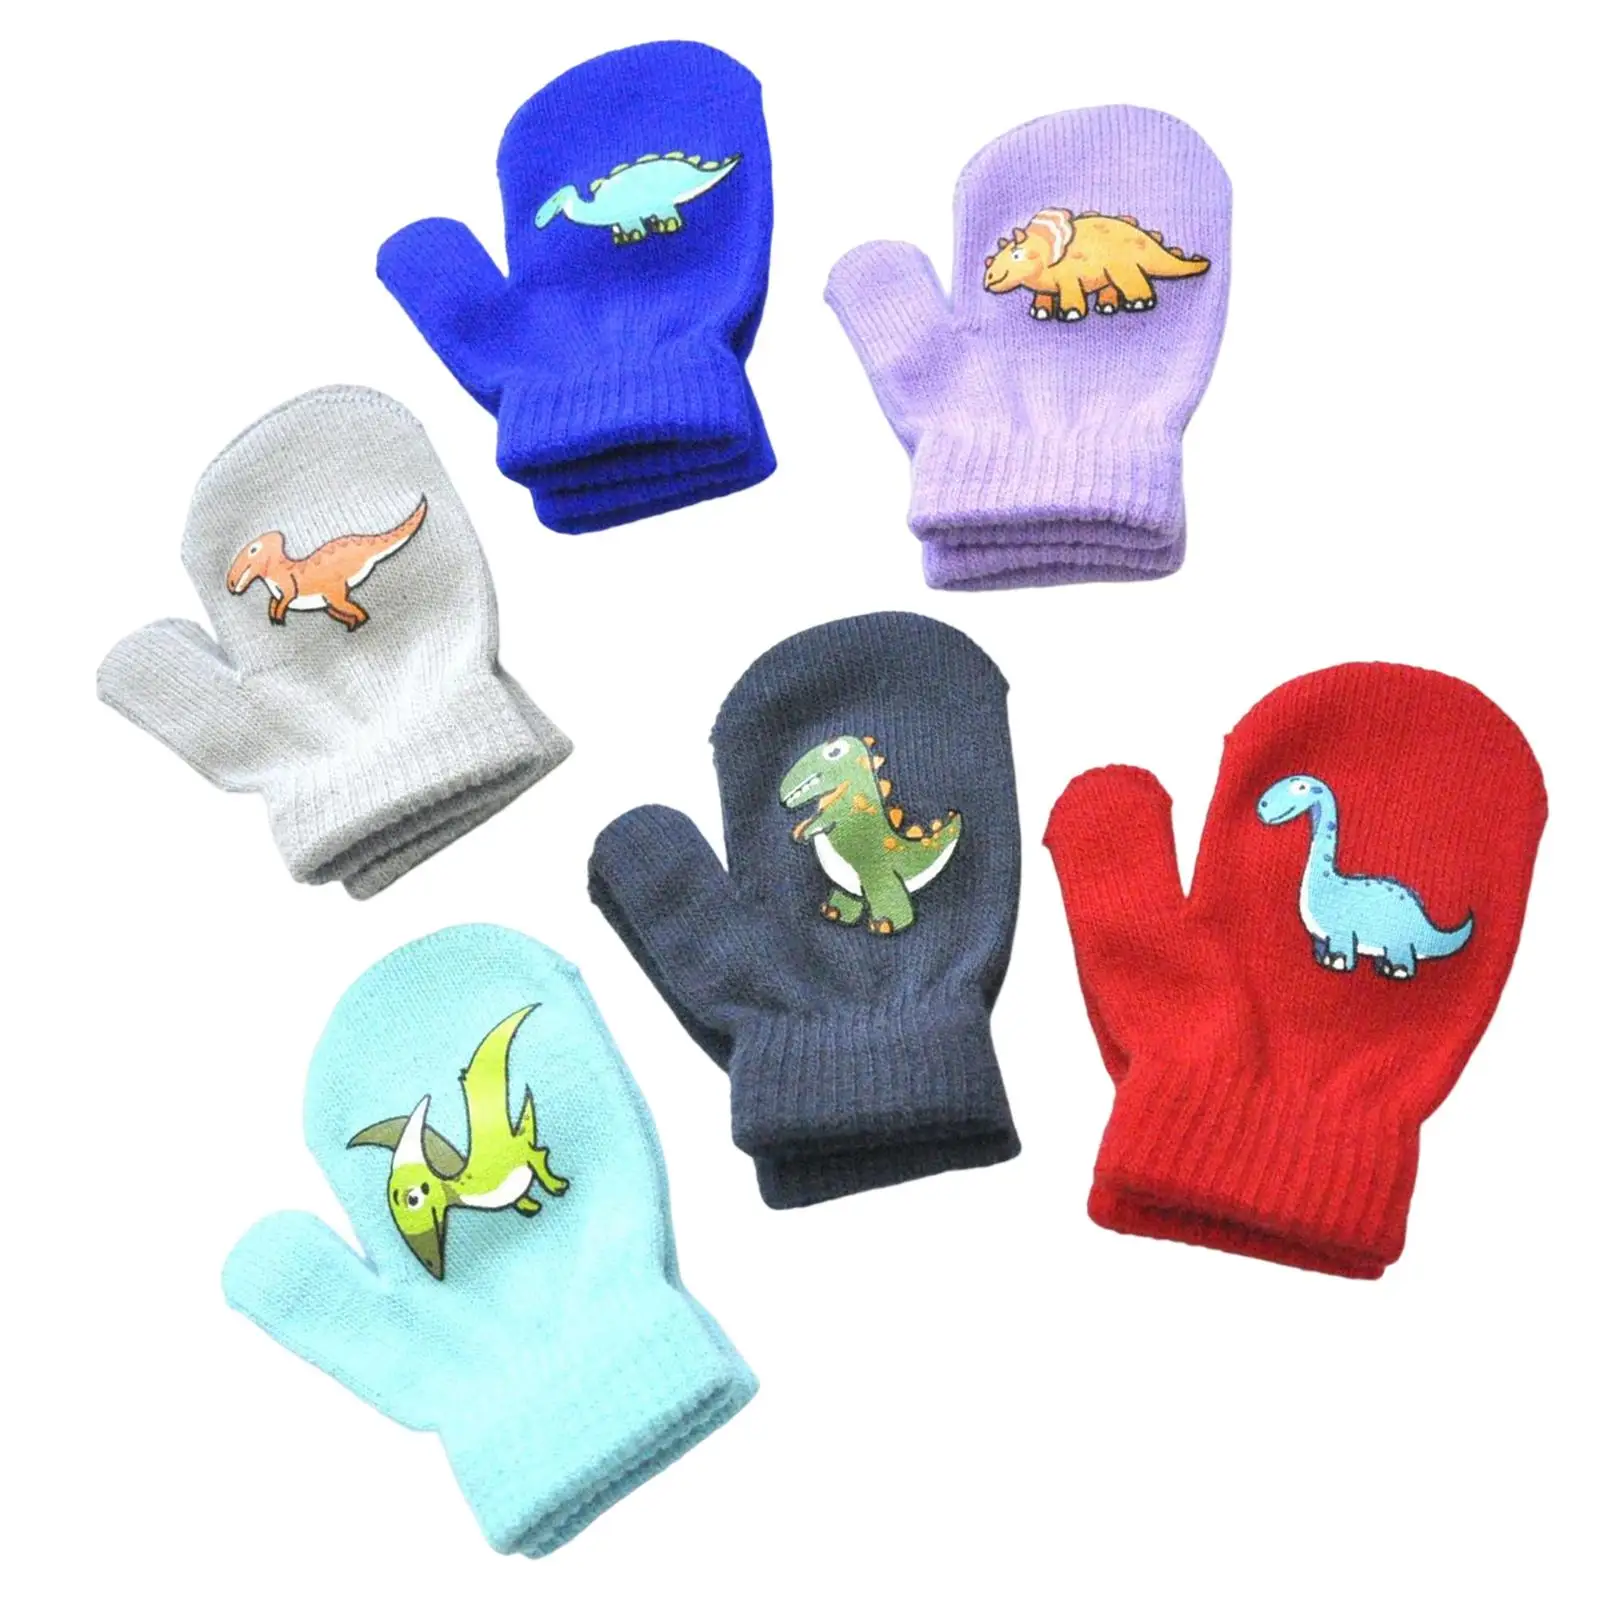 6 Pairs Kids Winter Gloves Stretch Knitted for Indoor and Outdoor Activities